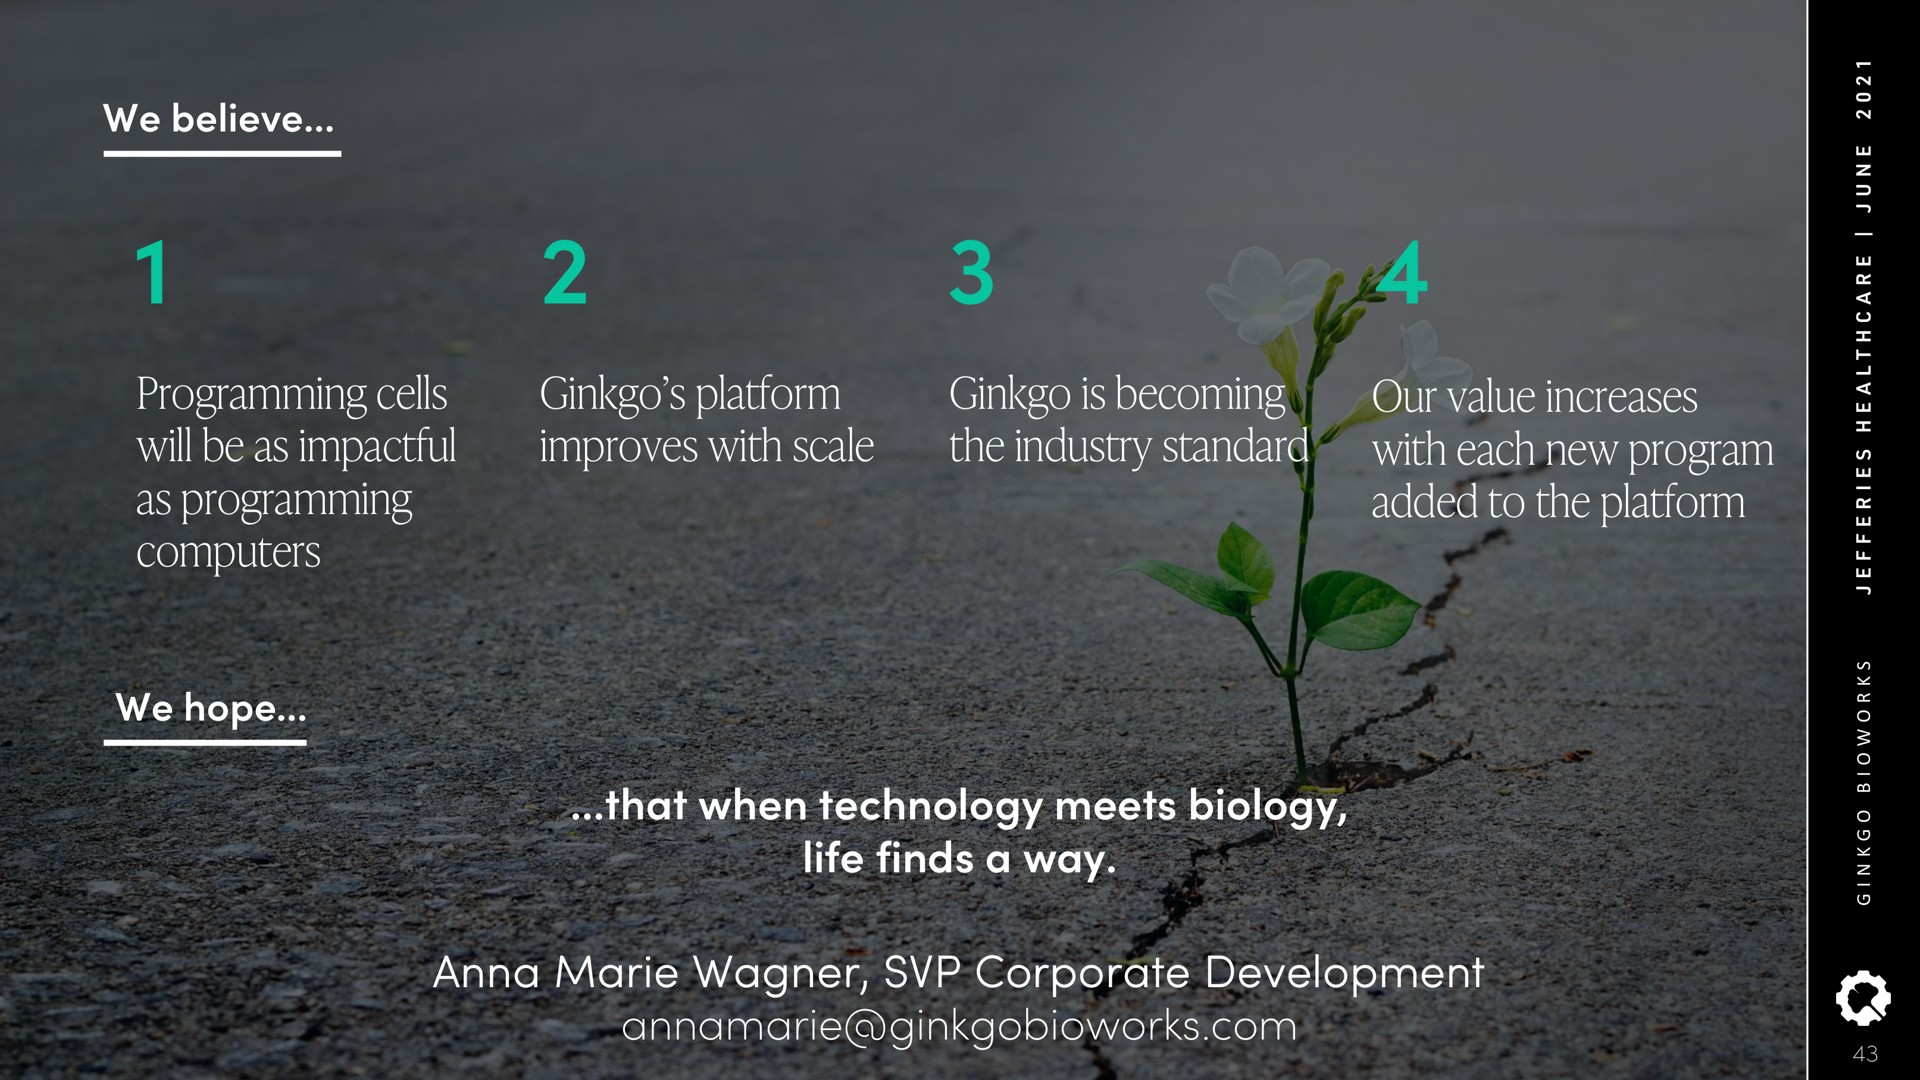 ginkgo platform improves with scale ginkgo is becoming the industry standard our value increases with each new program added to the platform programming cells will be as as programming computers that when technology meets biology life finds a way anna corporate development | Ginkgo